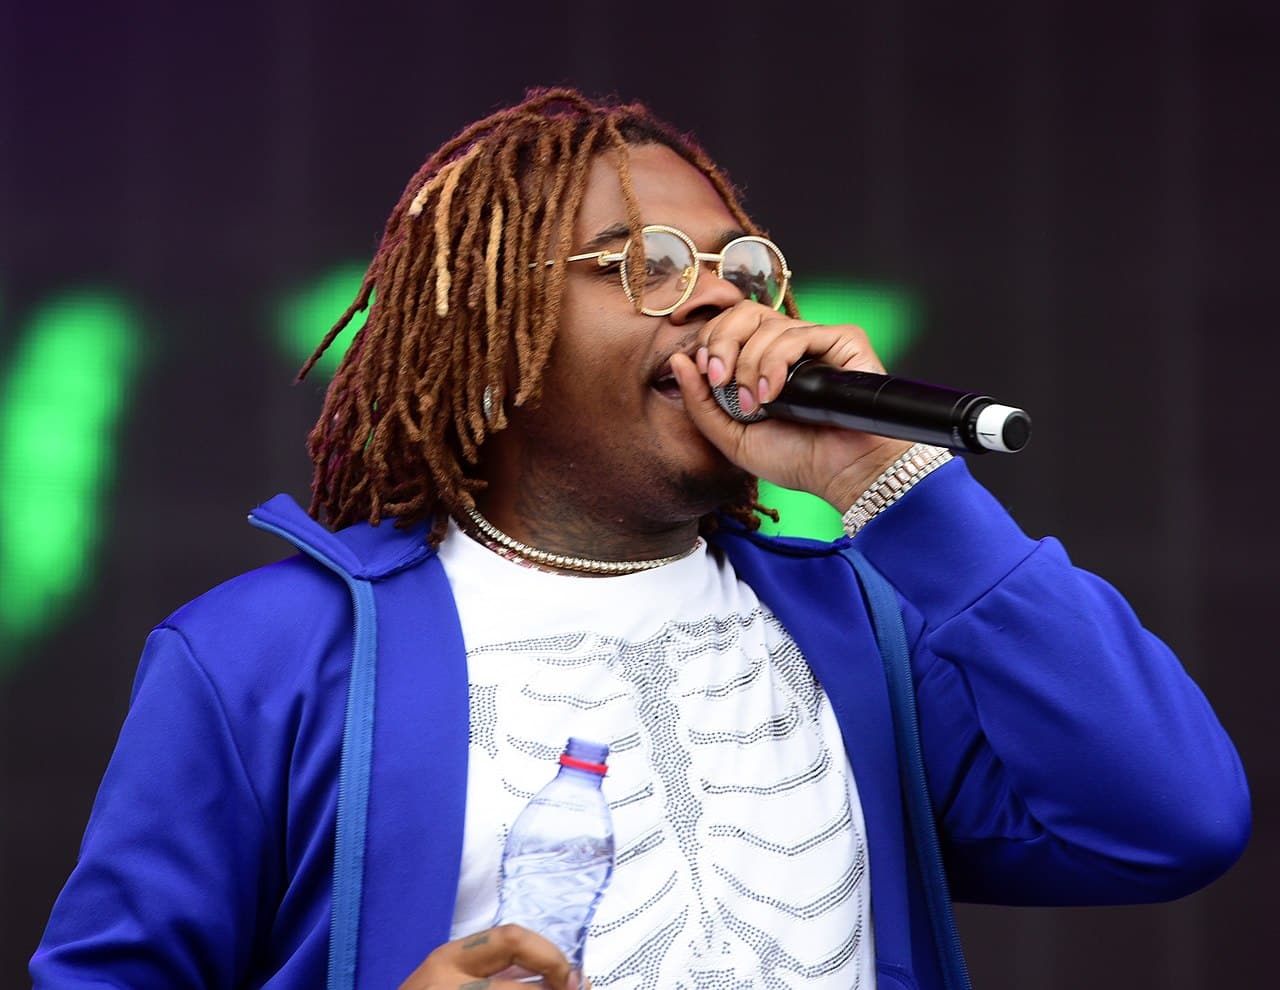 Gunna Net Worth, Age, Girlfriend, Wife, Family, Biography & More